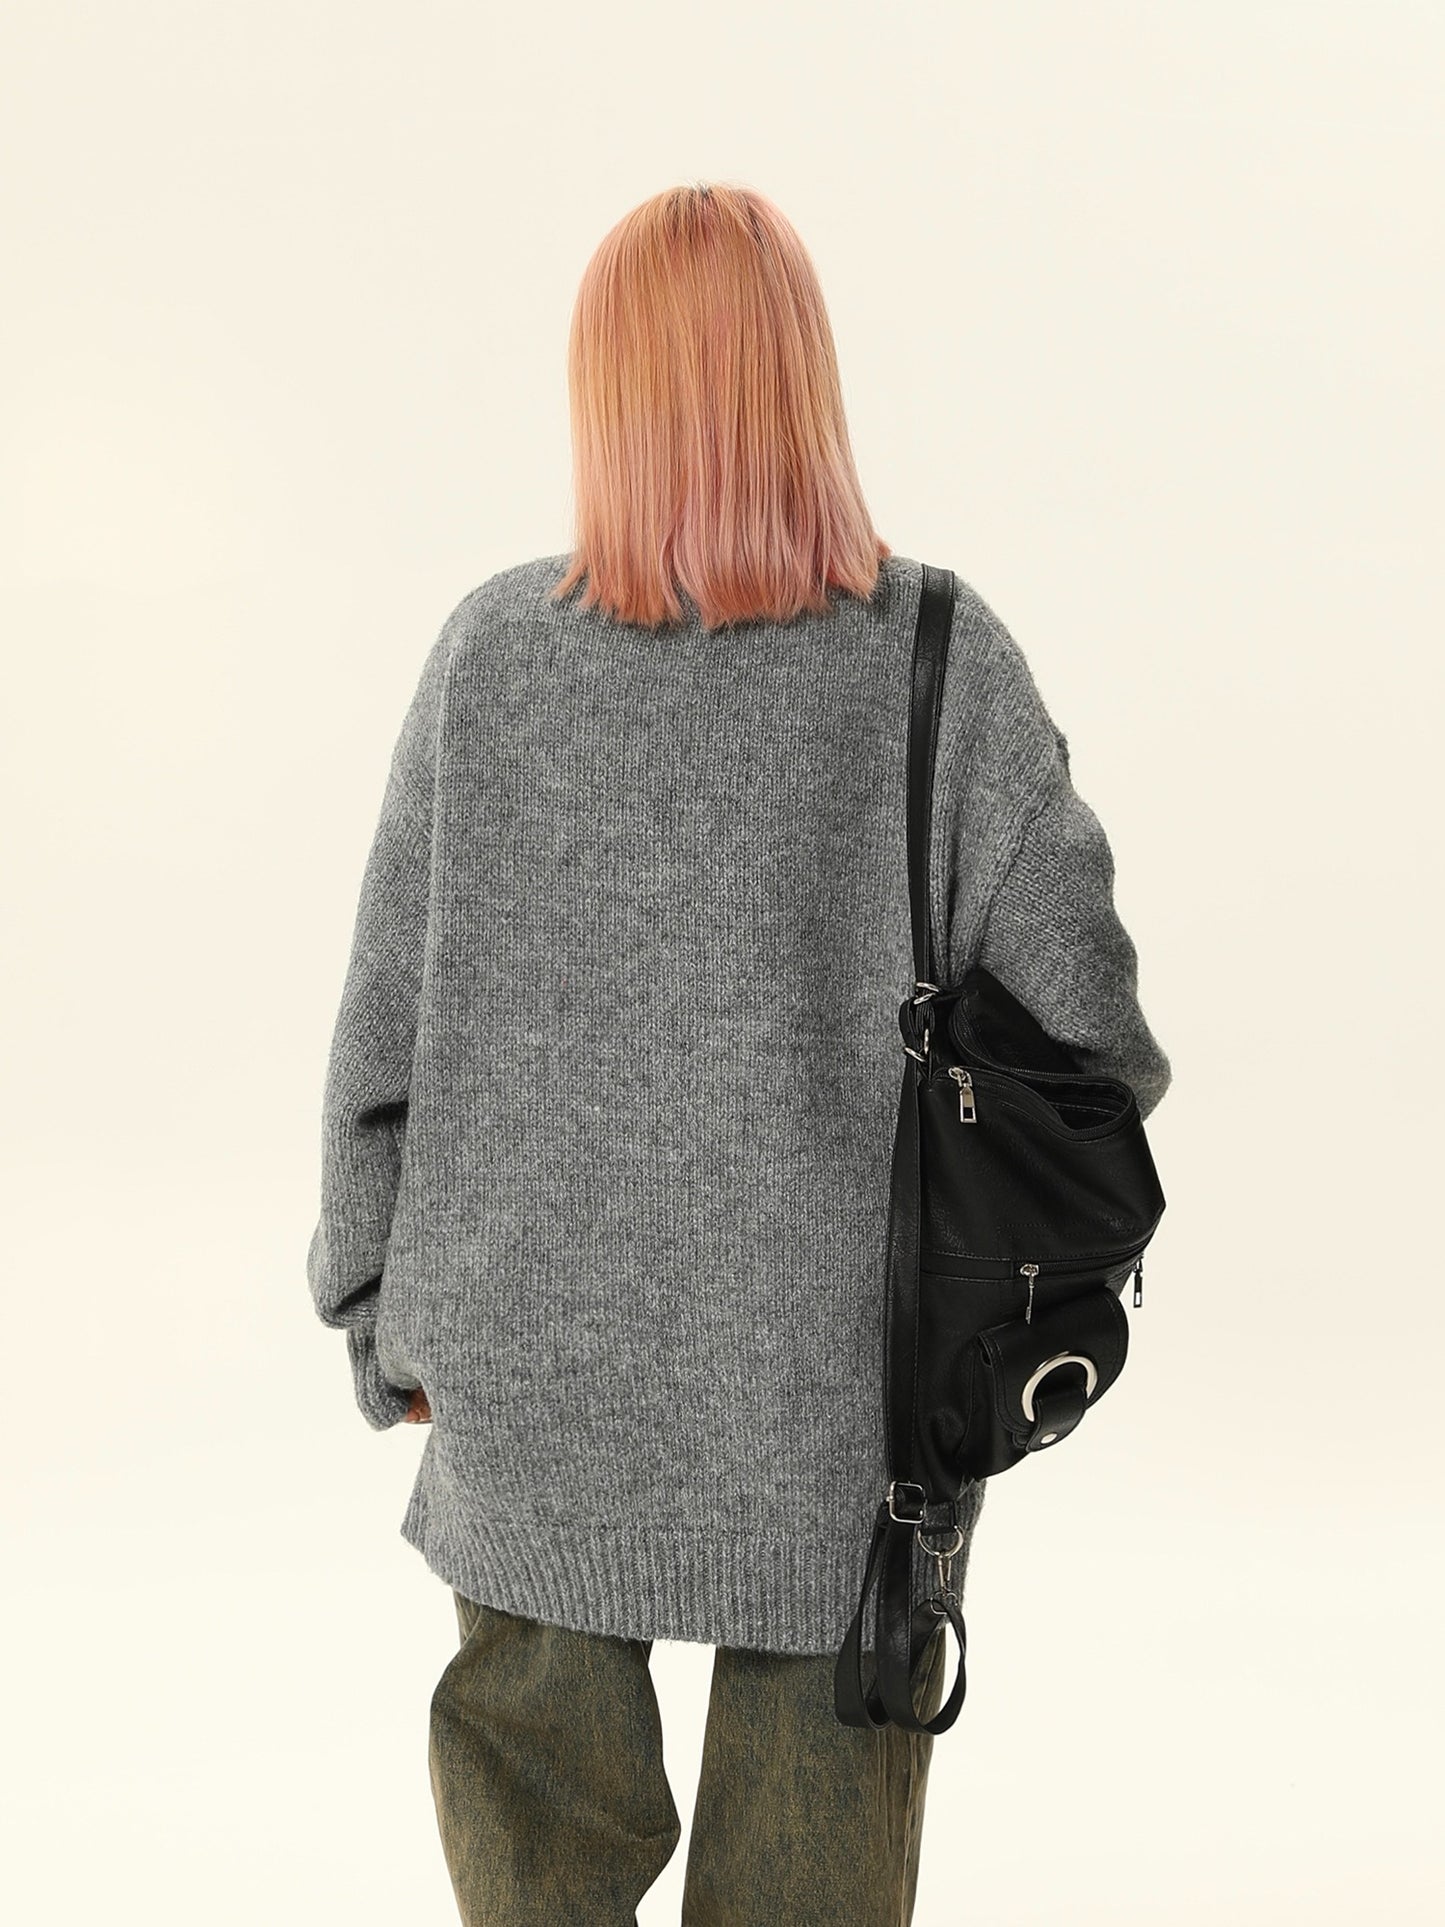 American Retro Gray Slouchy Style Sweater Jacket